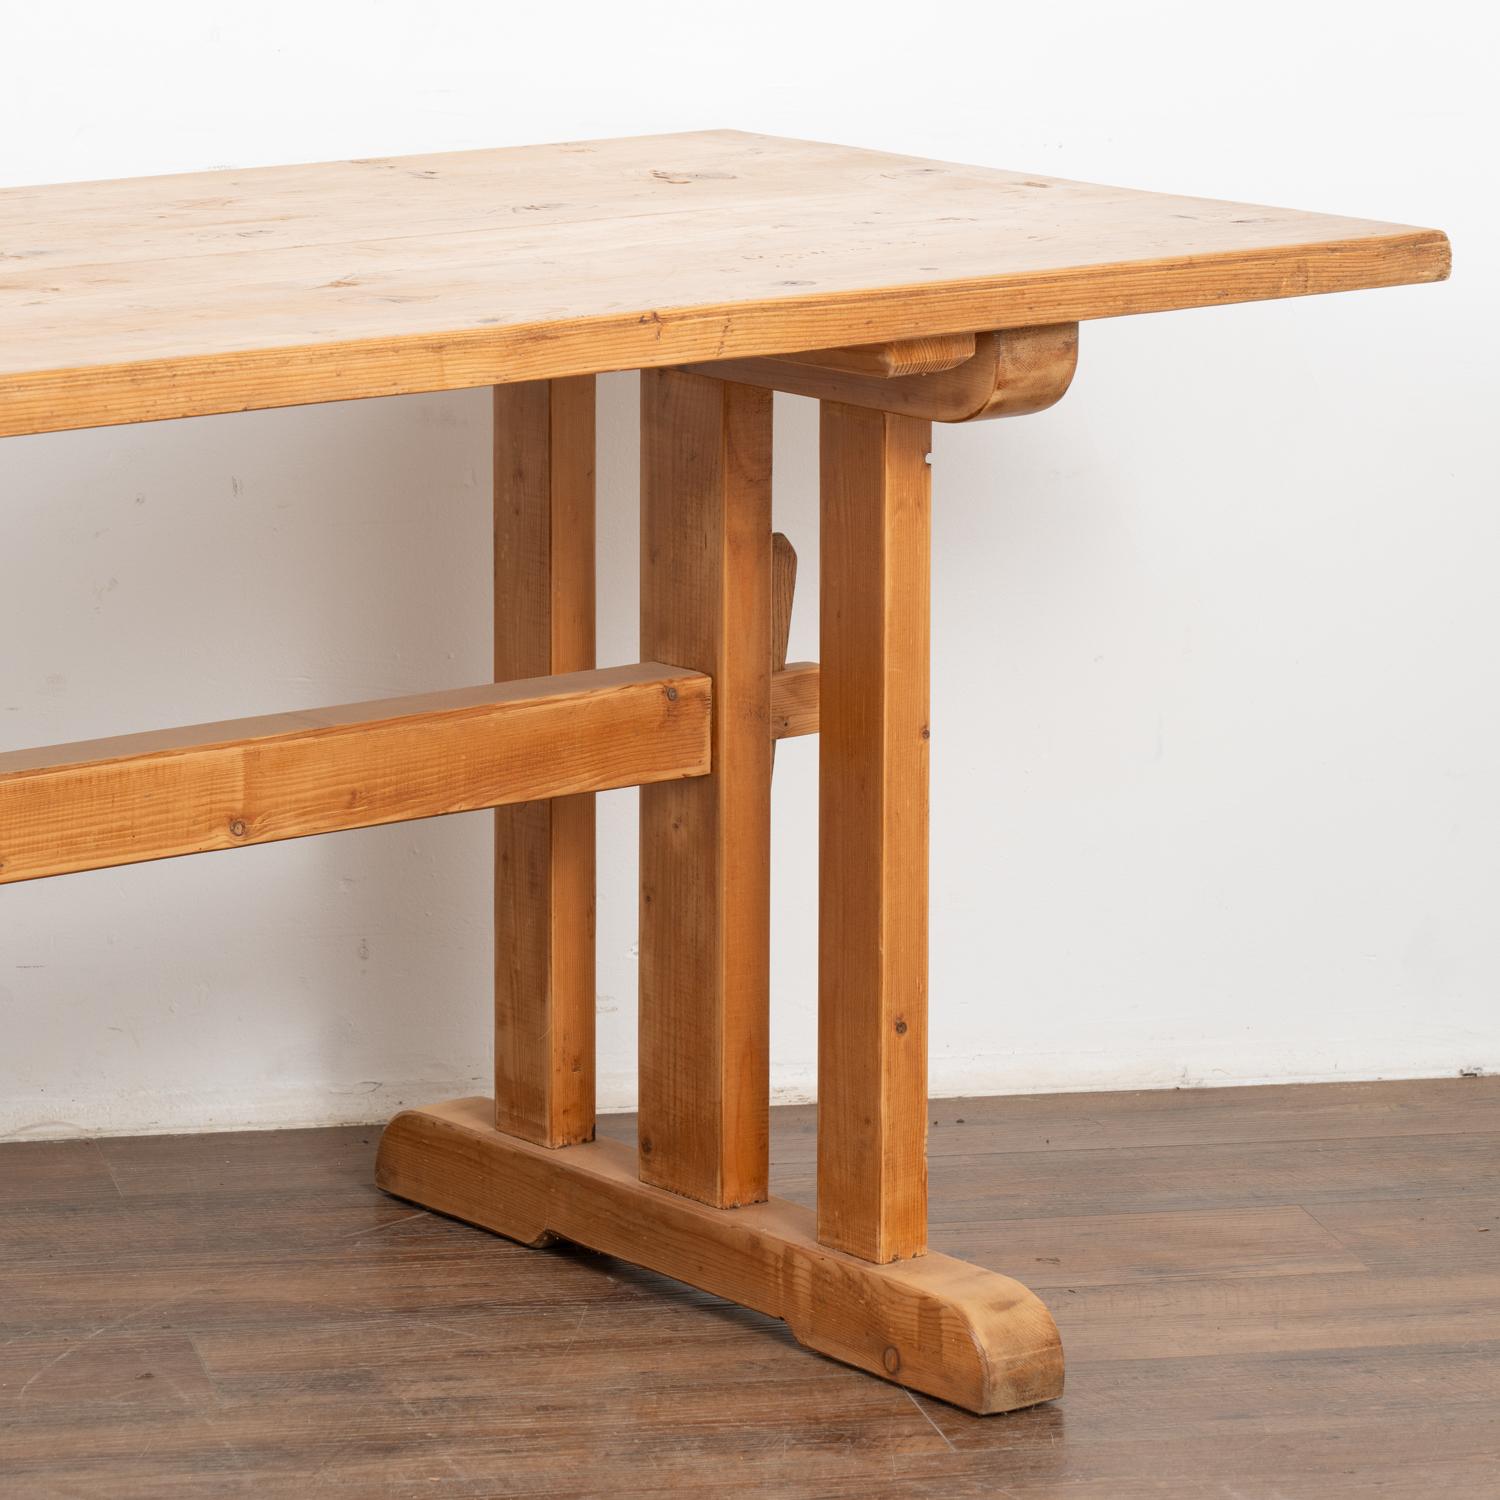 Hungarian Pine Farm Table Dining Trestle Table, Hungary circa 1890 For Sale